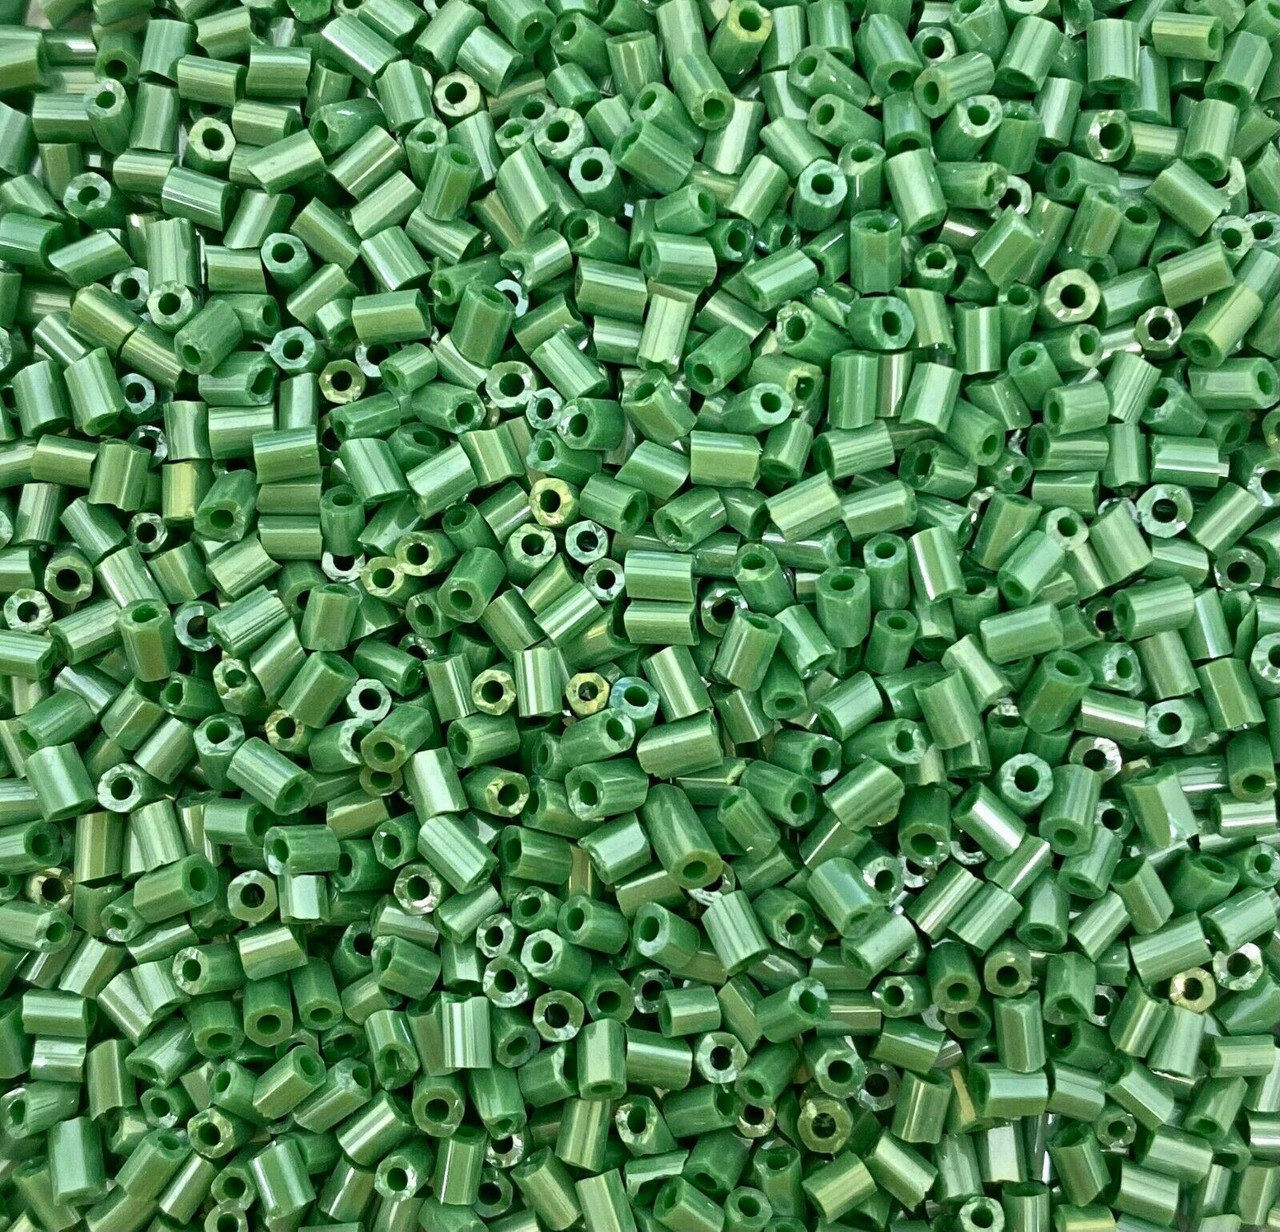 50g glass HEX seed beads - Green Opaque Lustred - size 11/0 (approx 2mm)